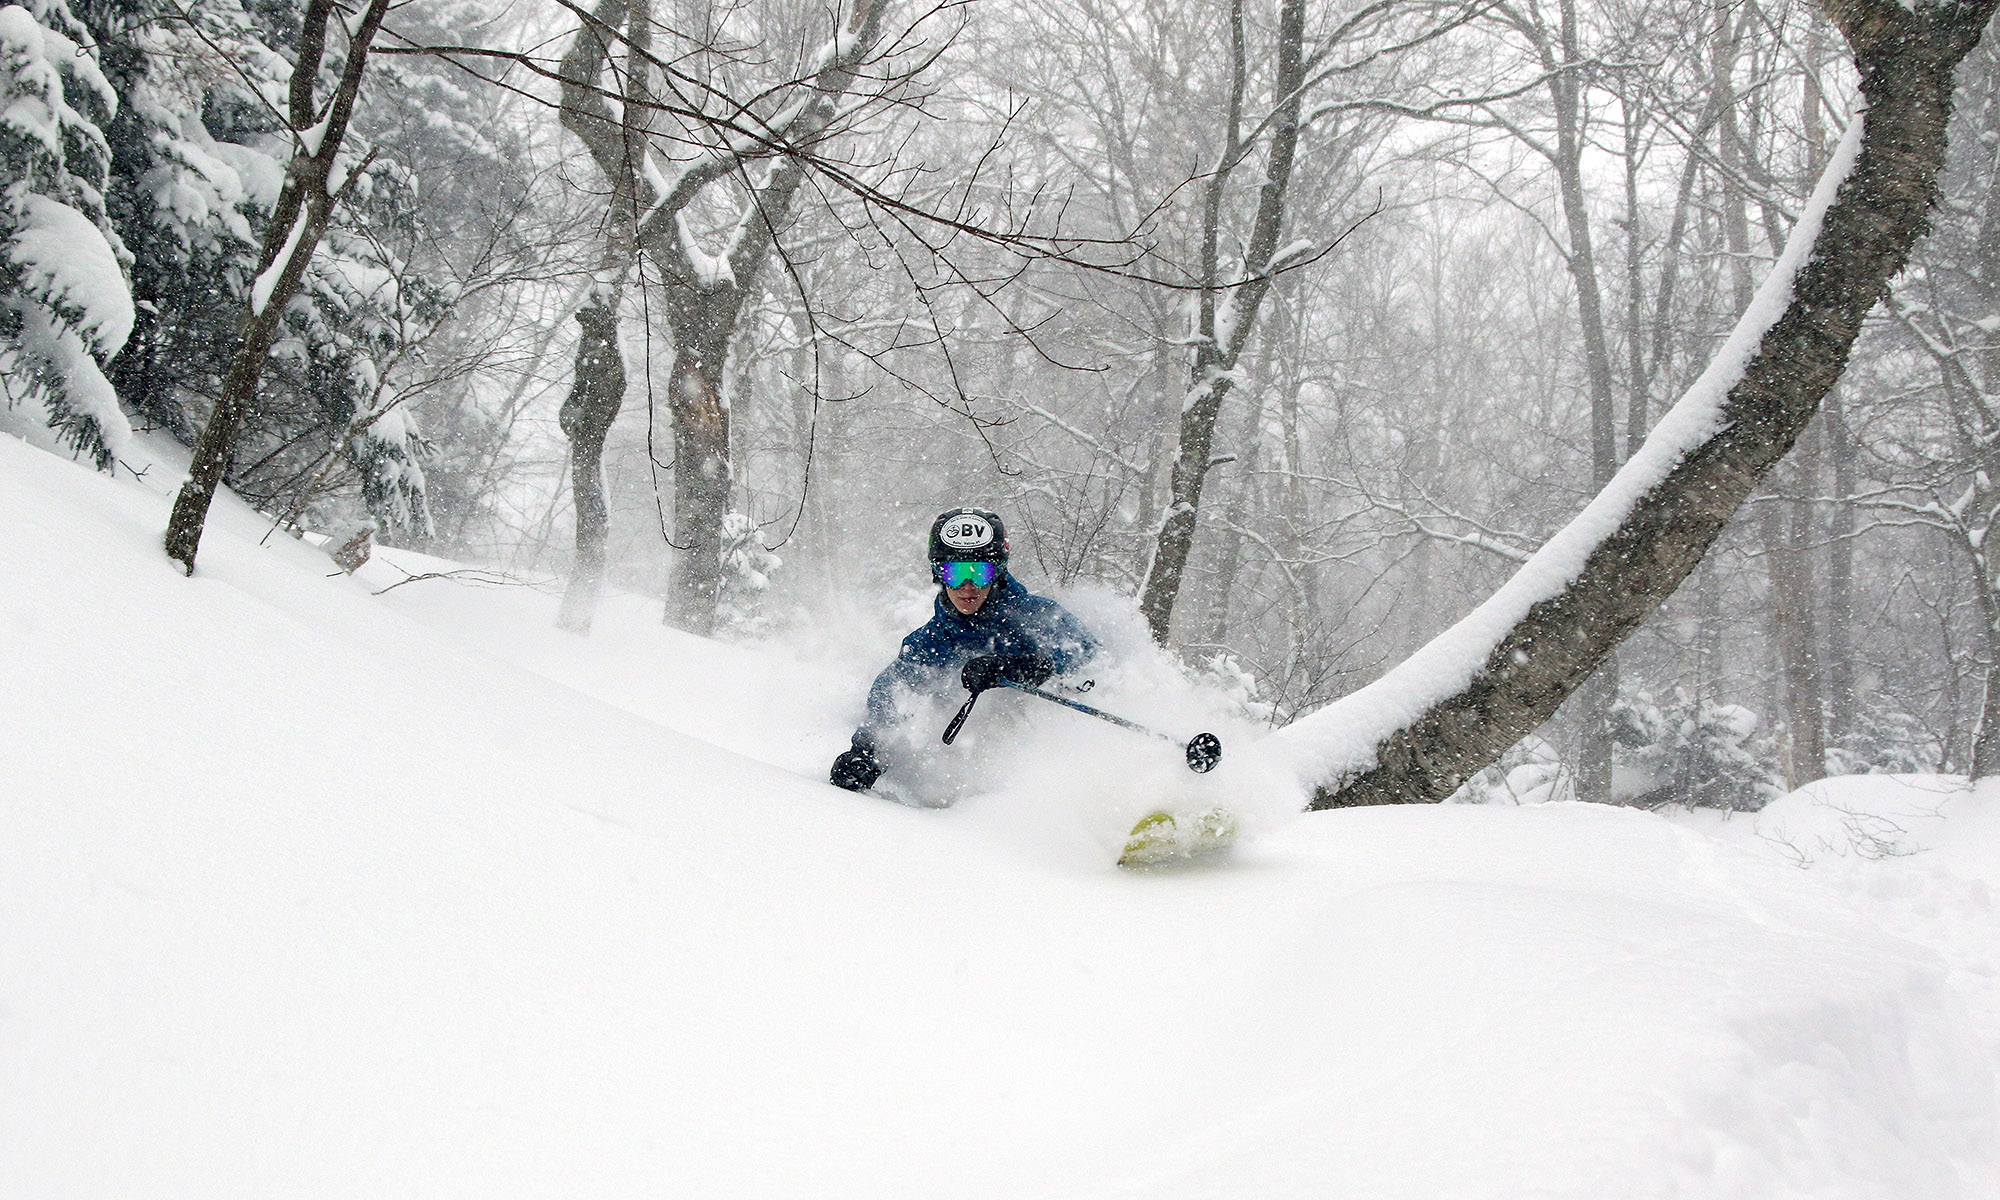 An image of Ty skiing deep powder on the Ravine trail at Stowe Mountain Resort in Vermont during Winter Storm Stella